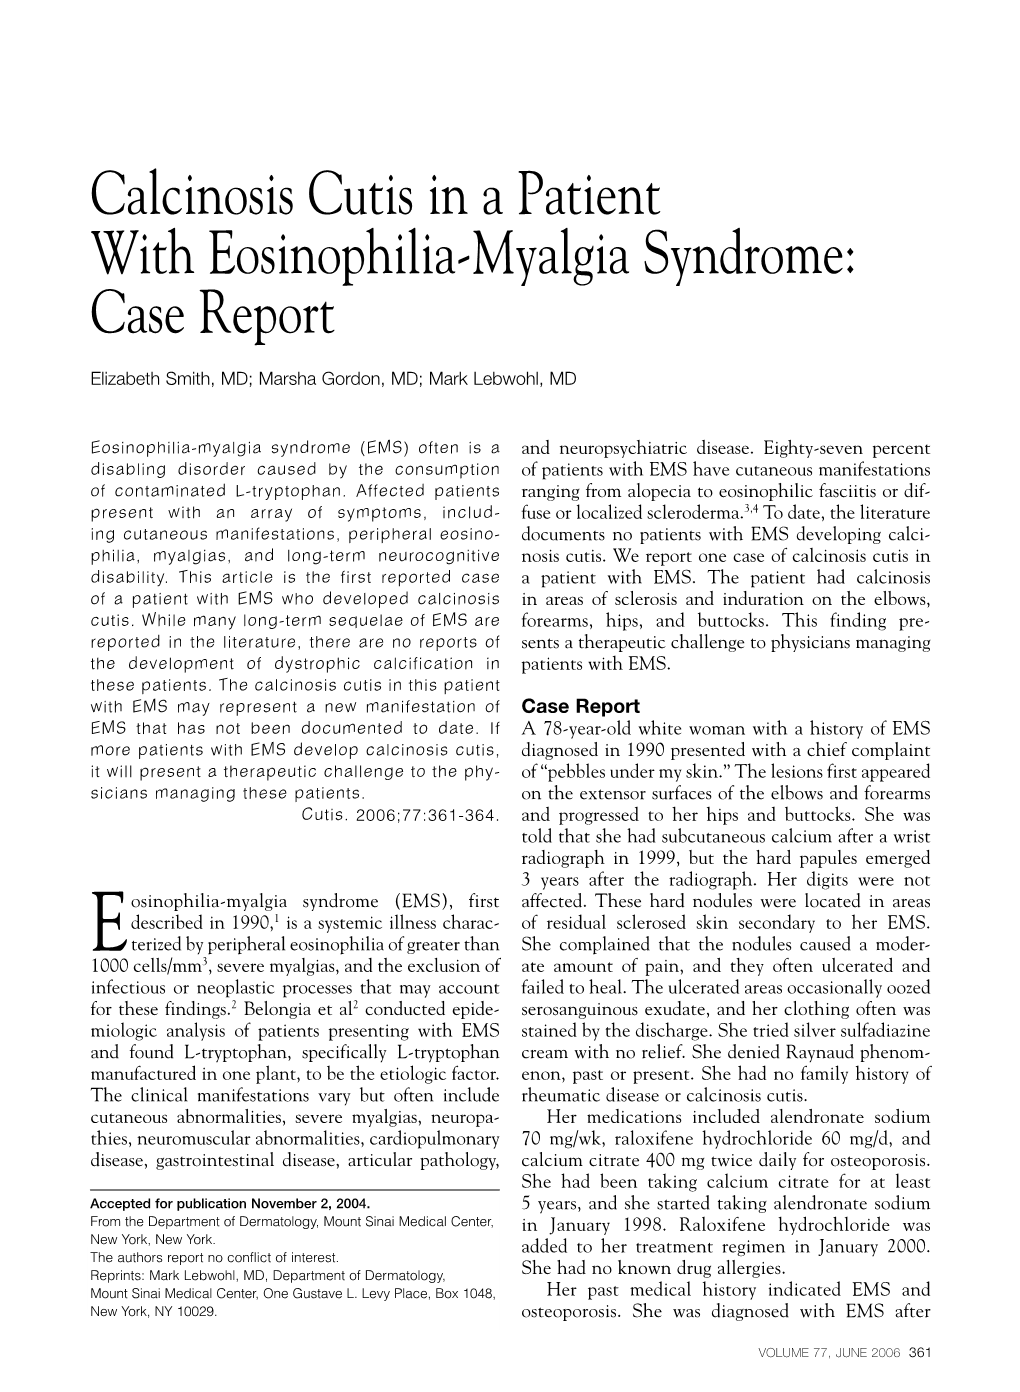 Calcinosis Cutis in a Patient with Eosinophilia-Myalgia Syndrome: Case Report